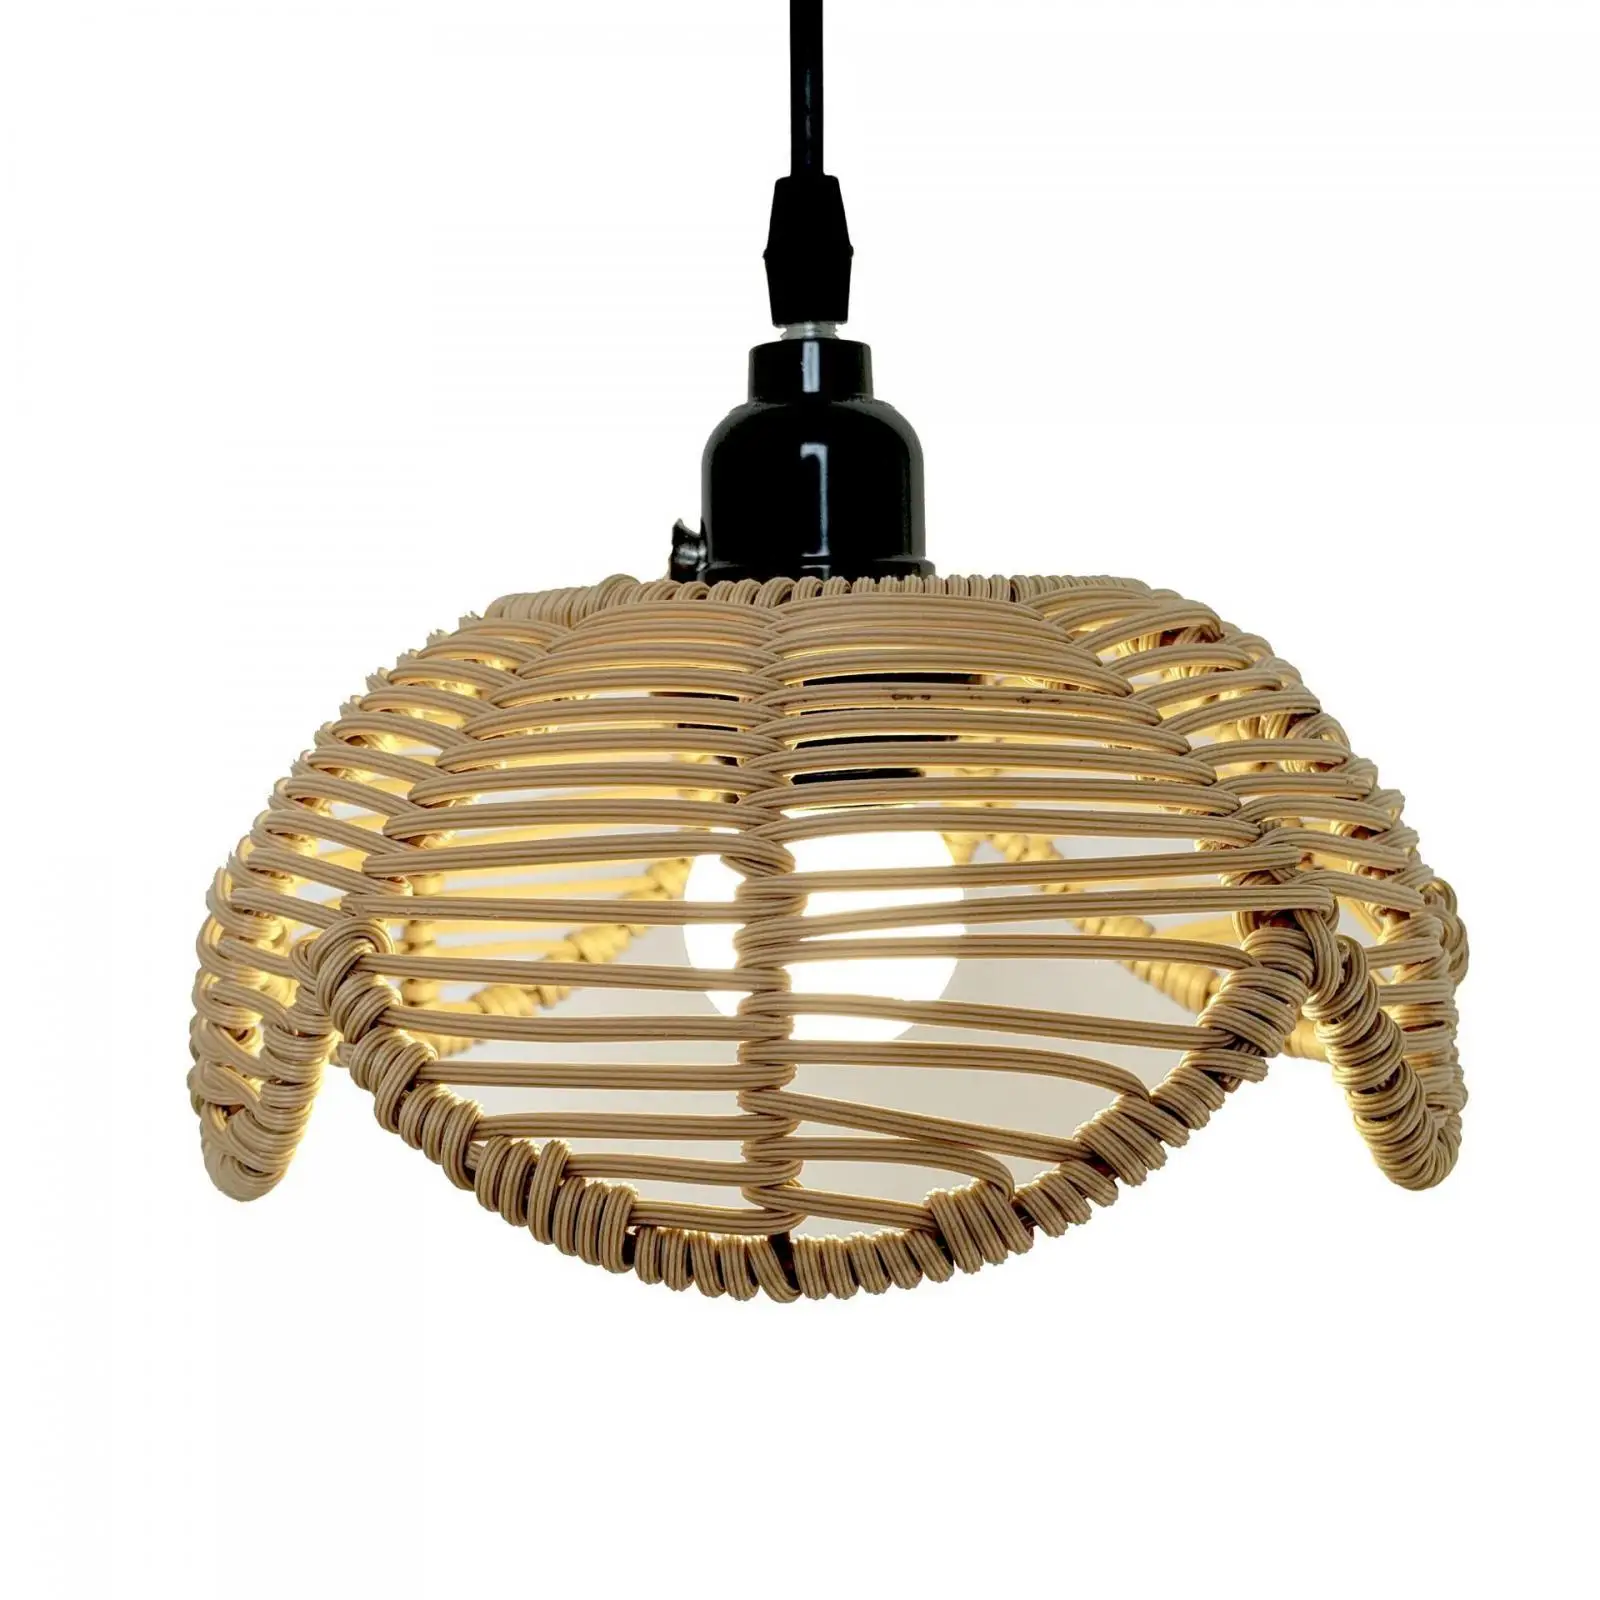 Handwoven Rattan Lamp Shade Decoration Droplight Creative Modern Ceiling Pendant Light Cover for Dining Room Restaurant Teahouse